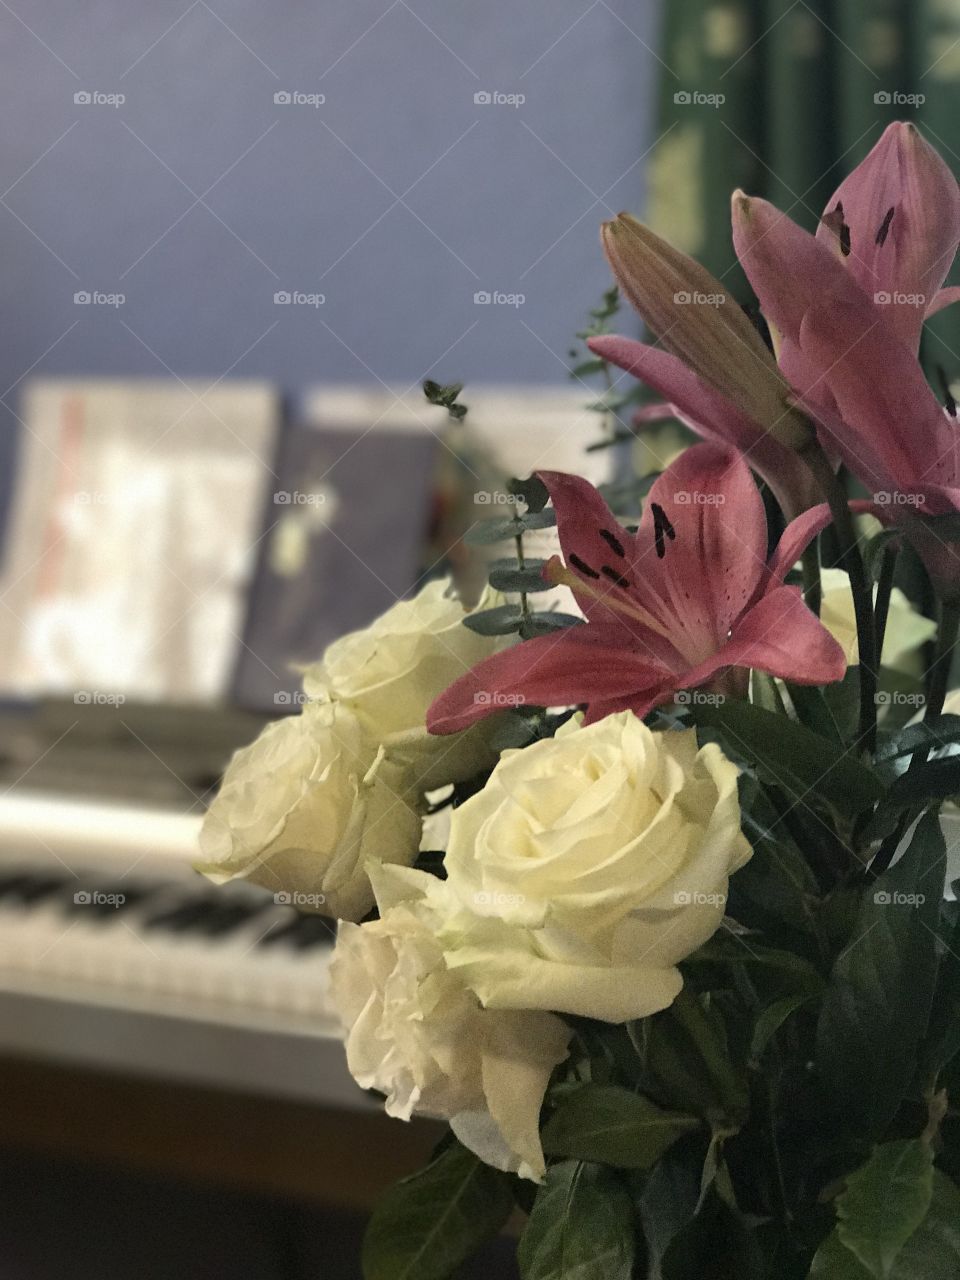 Flowers and Music